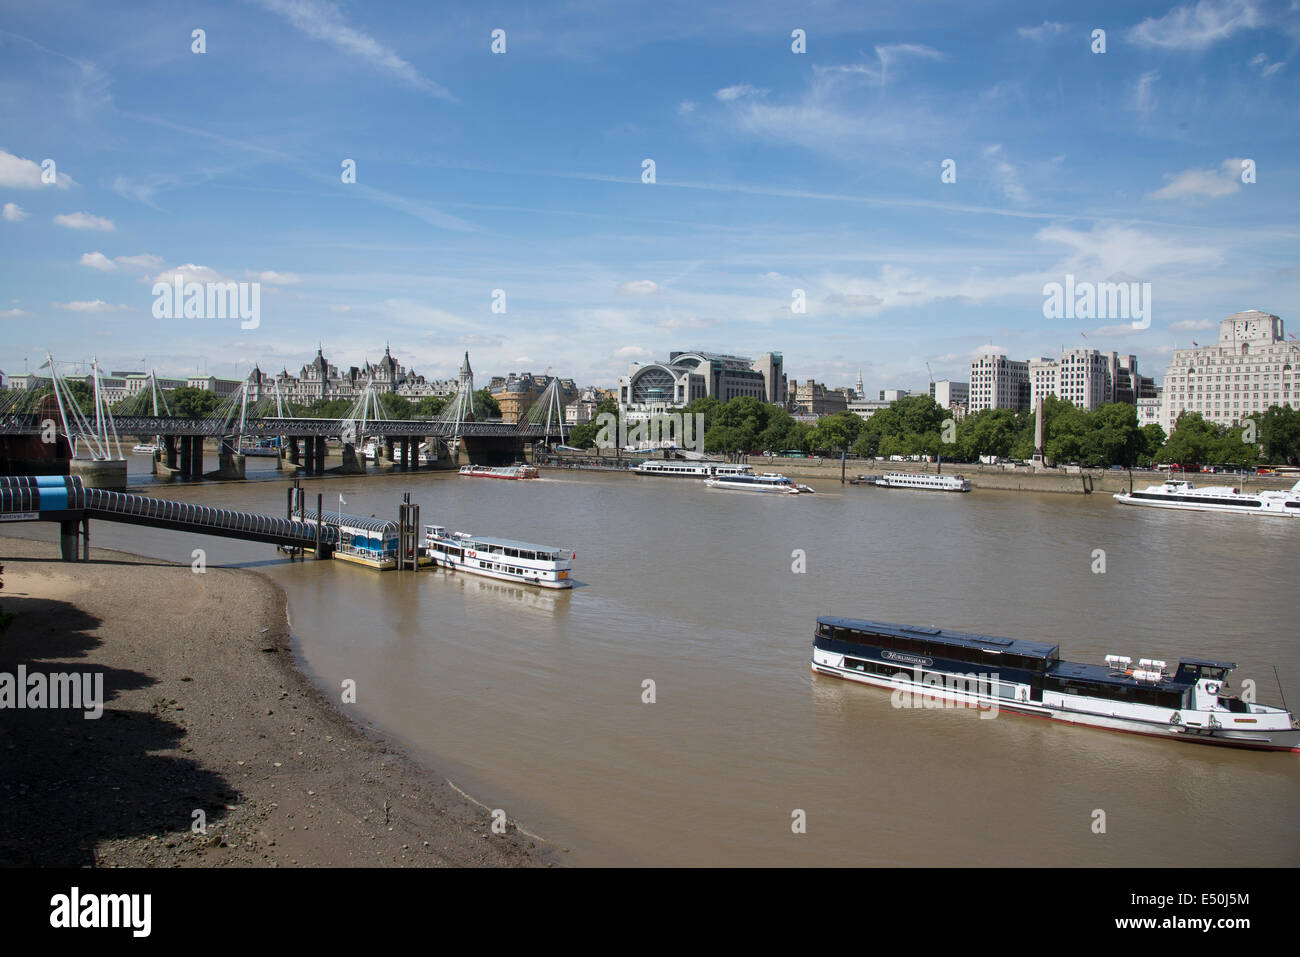 River Thames looking towards Festival Pier and Charing Cross station on the Embankment from Waterloo Bridge London UK Stock Photo